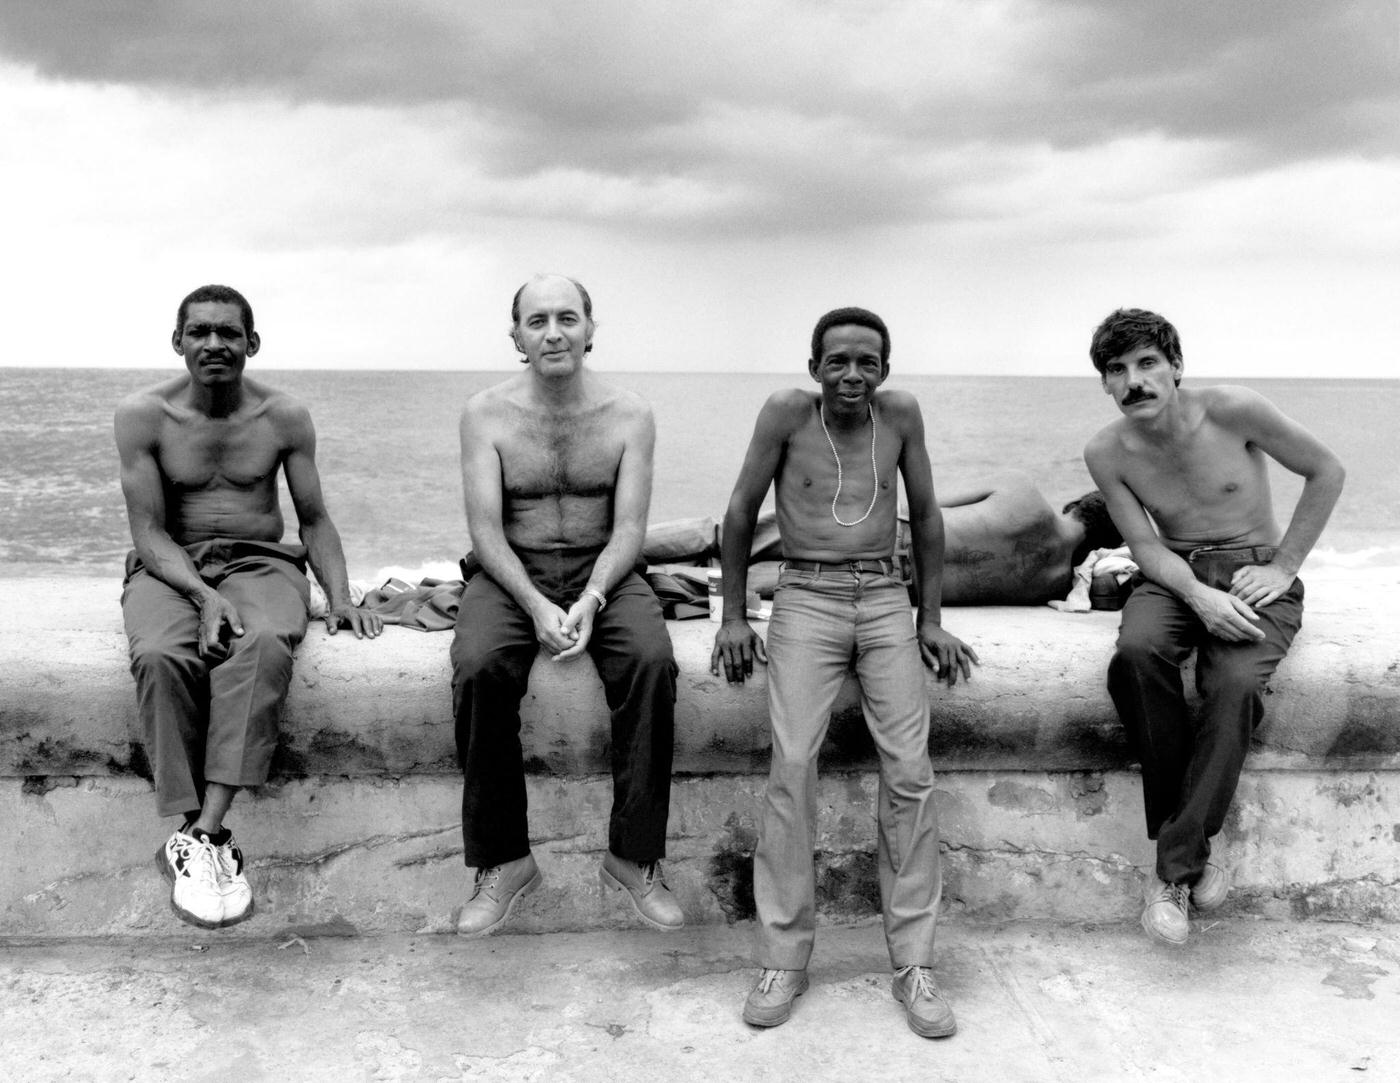 General view of four shirtless men posing for a portrait while sitting on a wall in Havana, Cuba, 1996.